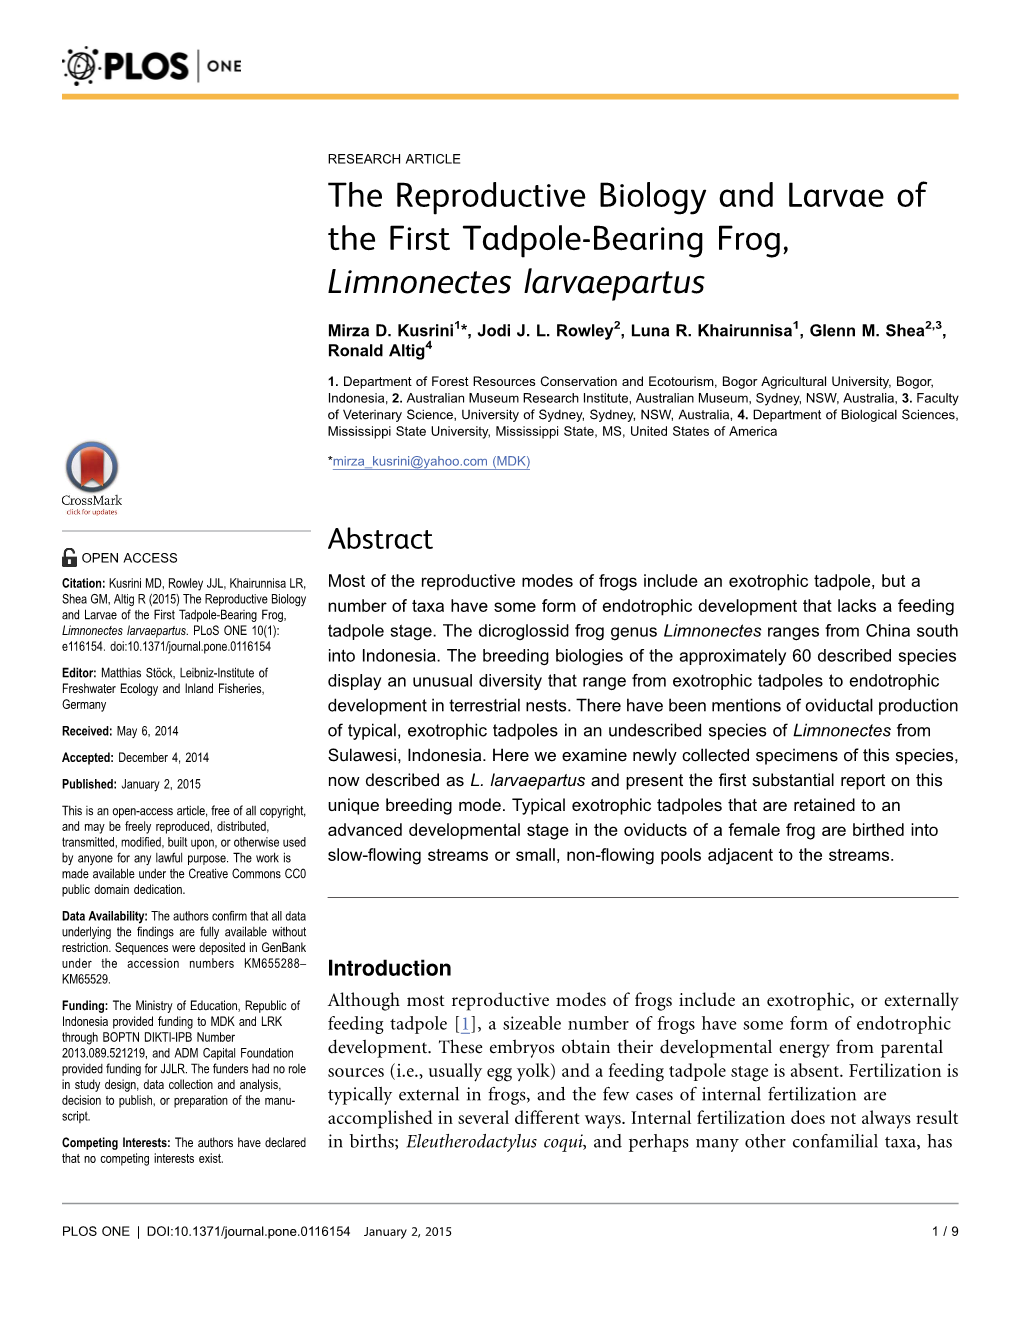 The Reproductive Biology and Larvae of the First Tadpole-Bearing Frog, Limnonectes Larvaepartus